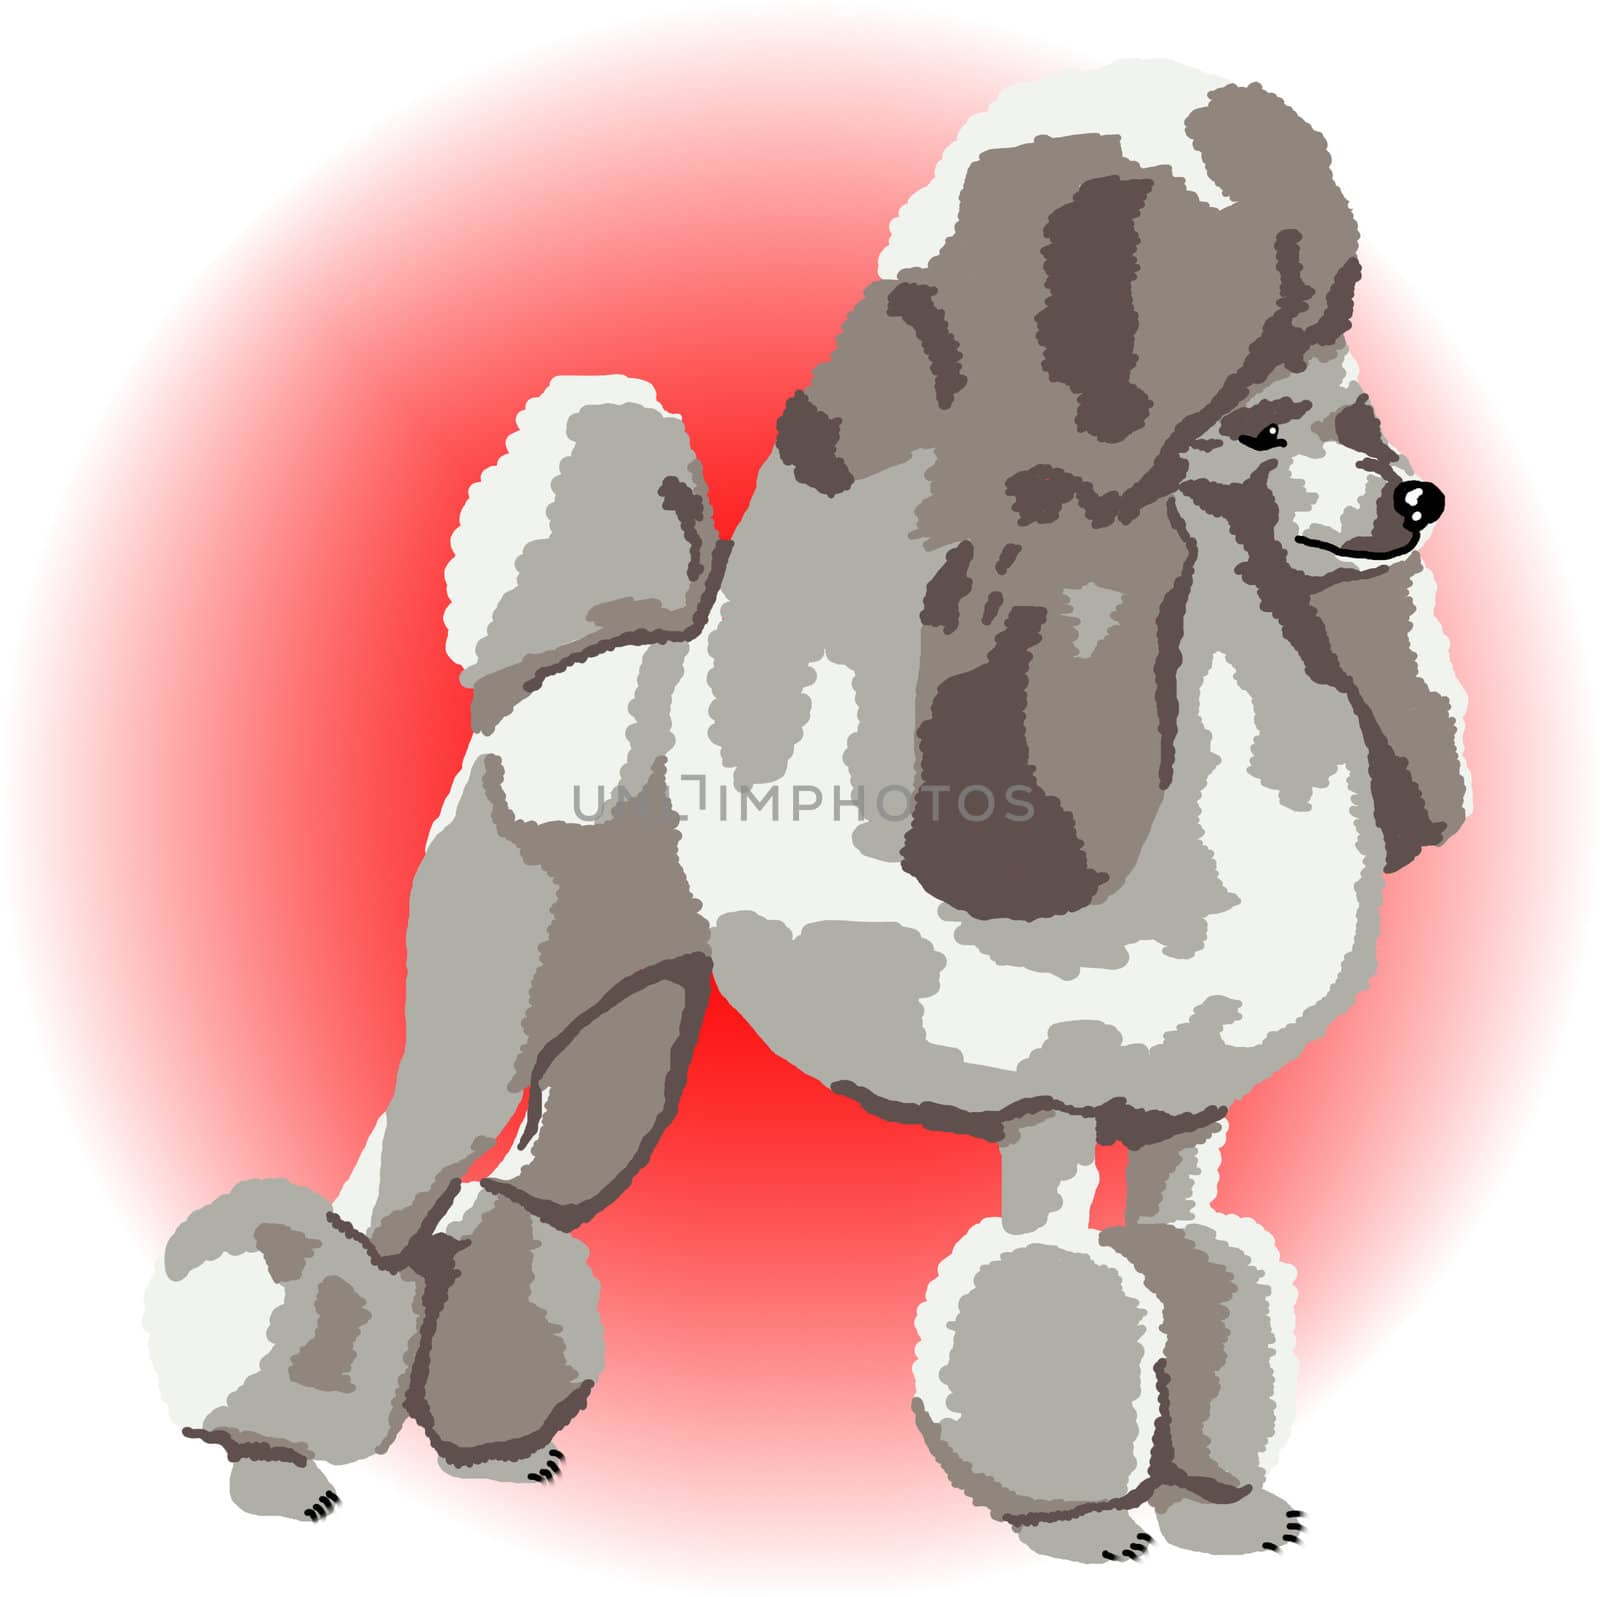 A silver poodle standing on point with a red color spot in the background - a raster illustration.